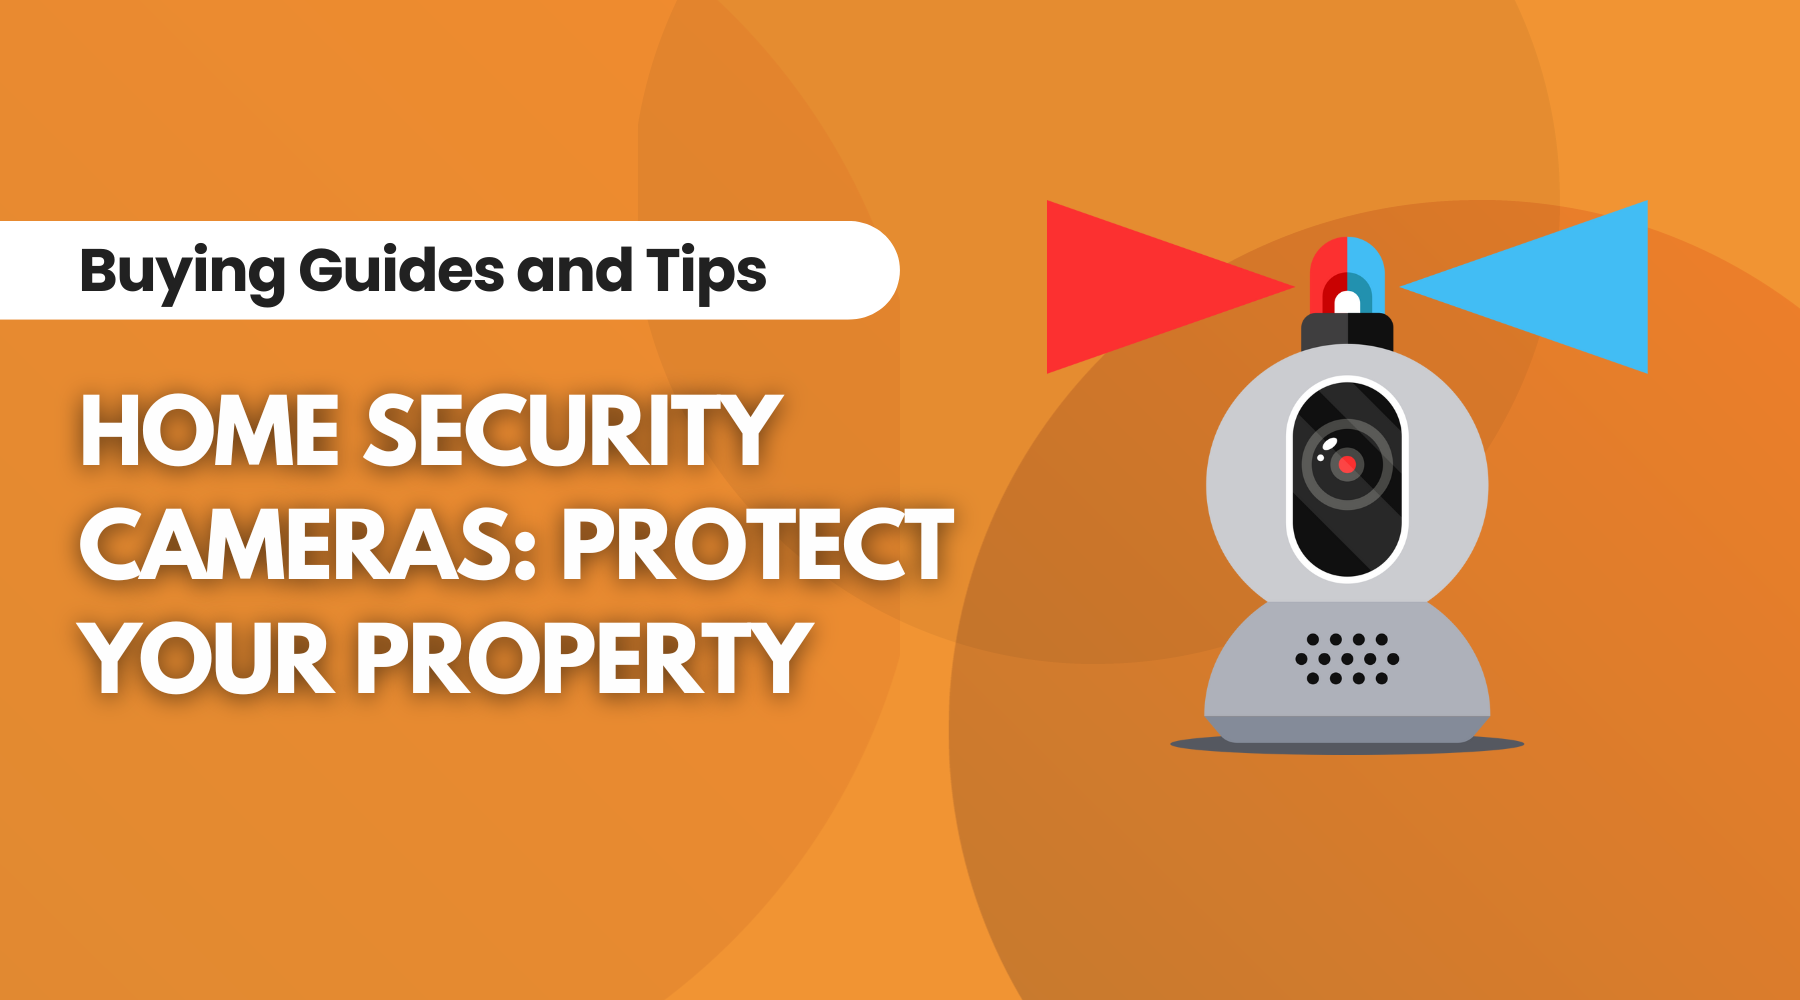 Buying Guide for Home Security Cameras: Protecting Your Property, Blog Written By Irwin’s Megastore